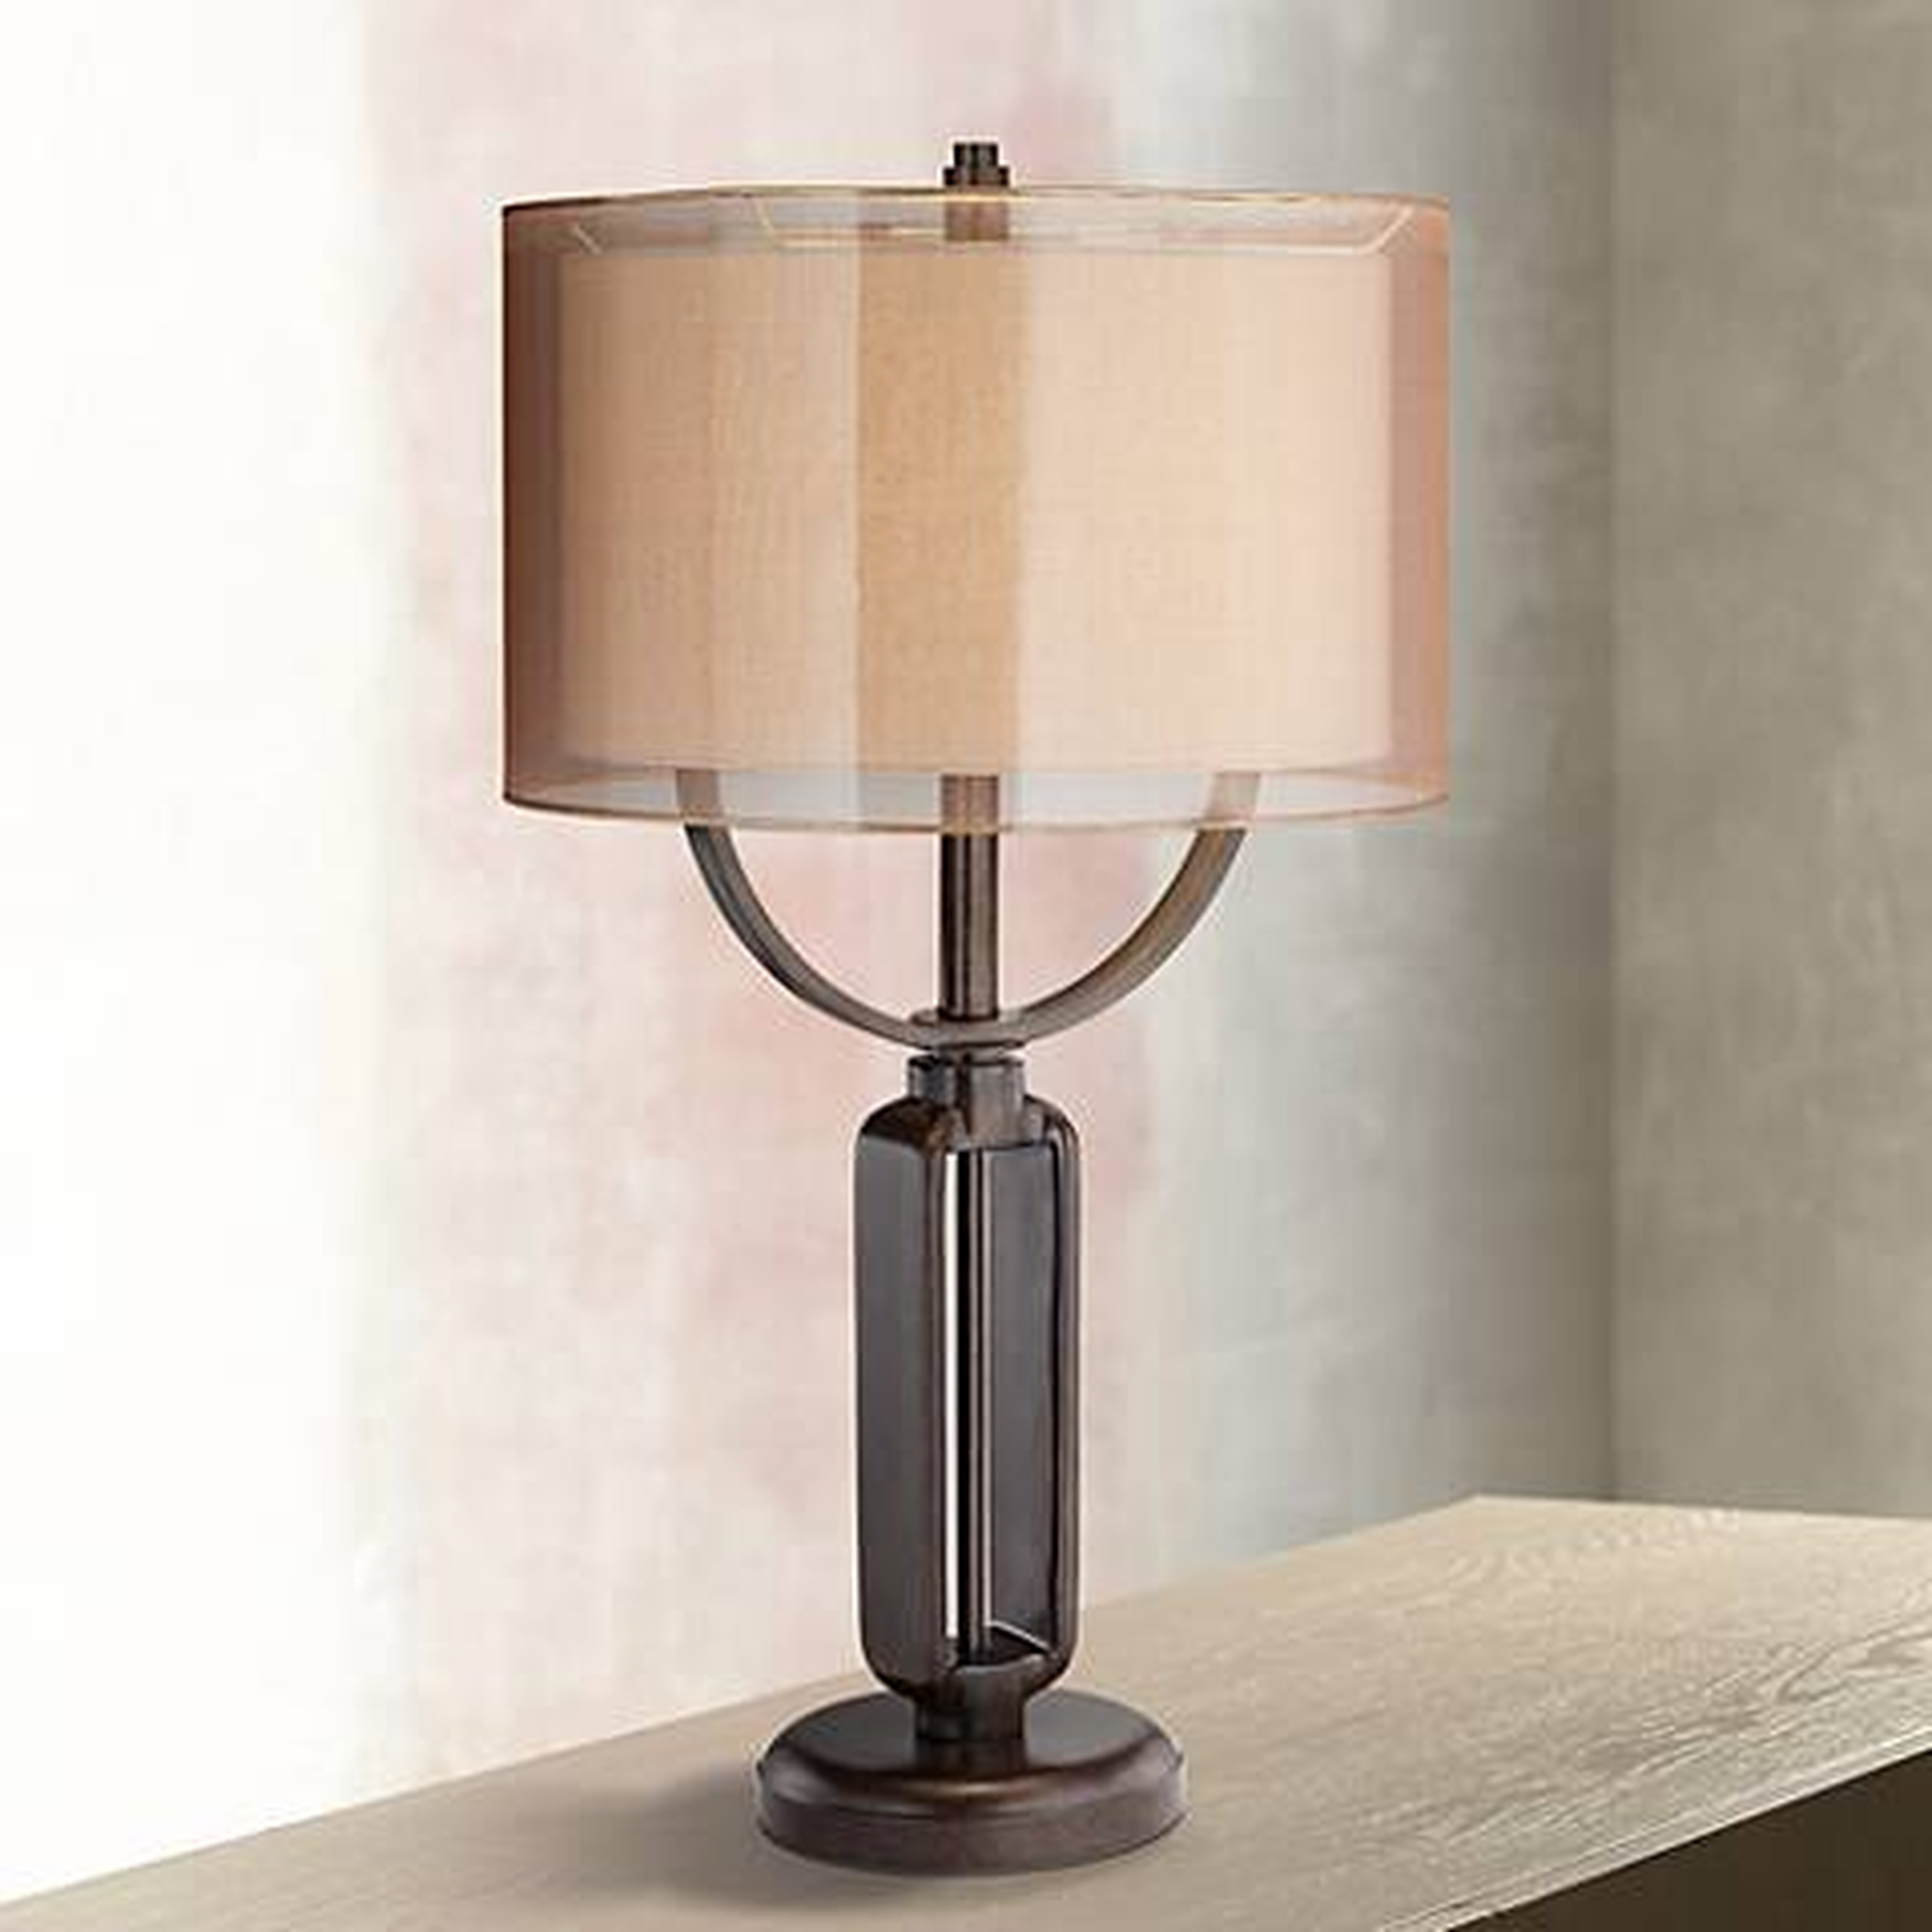 Franklin Iron Works Monroe Industrial Table Lamp - Lamps Plus